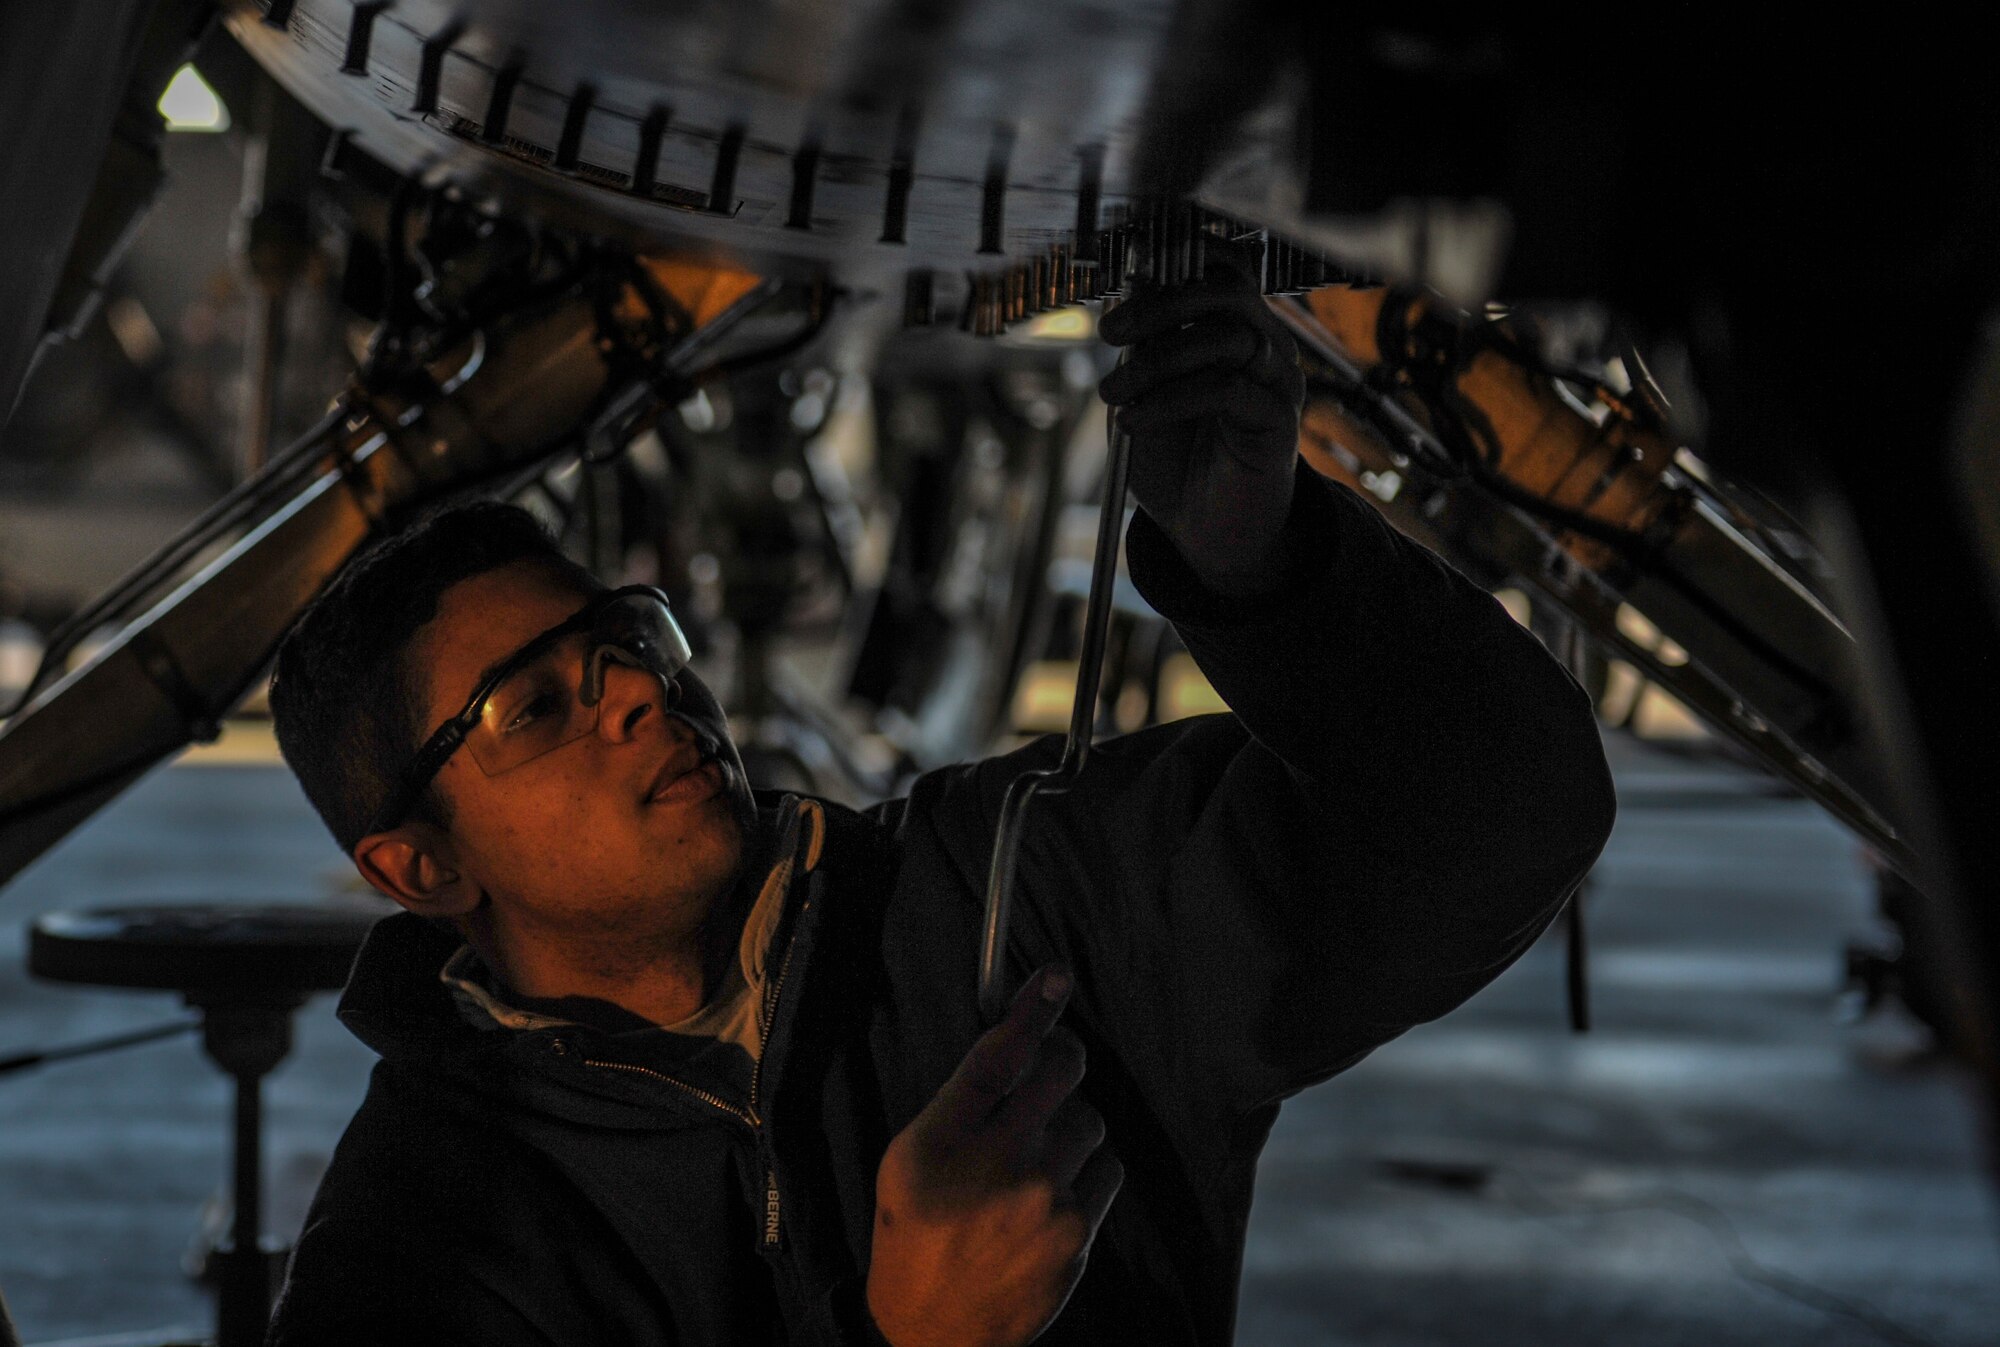 Airman 1st Class Angelo Borbon, 8th Maintenance Squadron inspection section team member, inspects the landing gear of an F-16 Fighting Falcon at Kunsan Air Base, Republic of Korea, Dec. 6, 2016.  Kunsan airmen work to employ airpower to deter aggression, preserve the Armistice and defend the Republic of Korea. (U.S. Air Force photo by Senior Airman Colville McFee/Released)